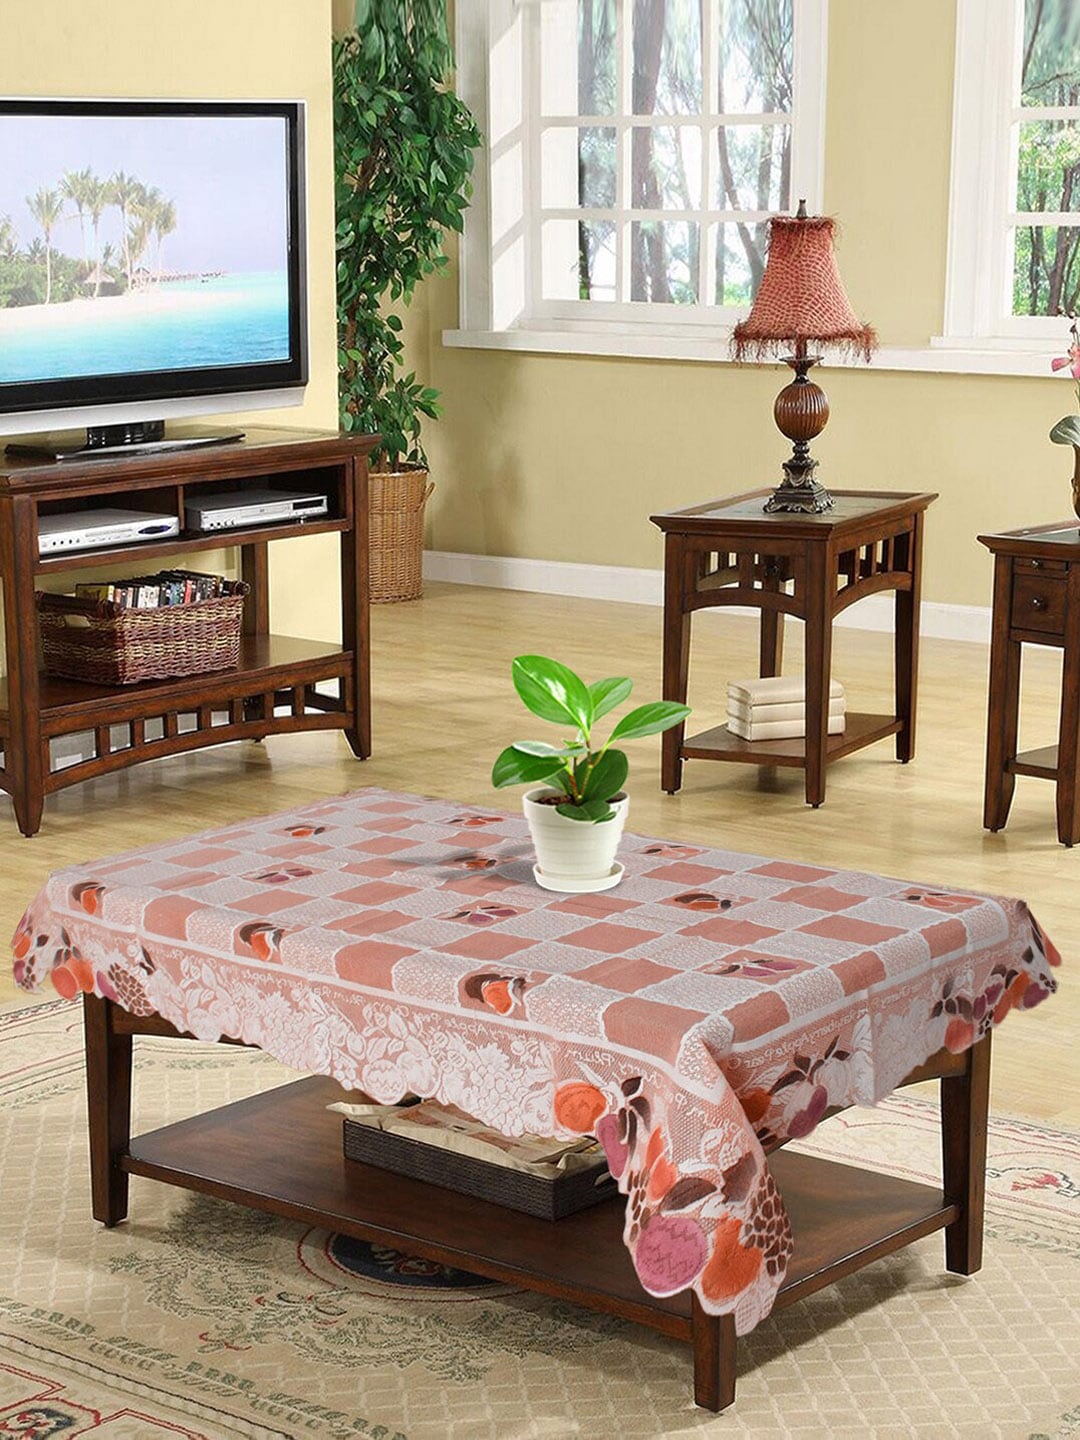 Kuber Industries Pink Printed 4 Seater Cotton Table Cover Price in India